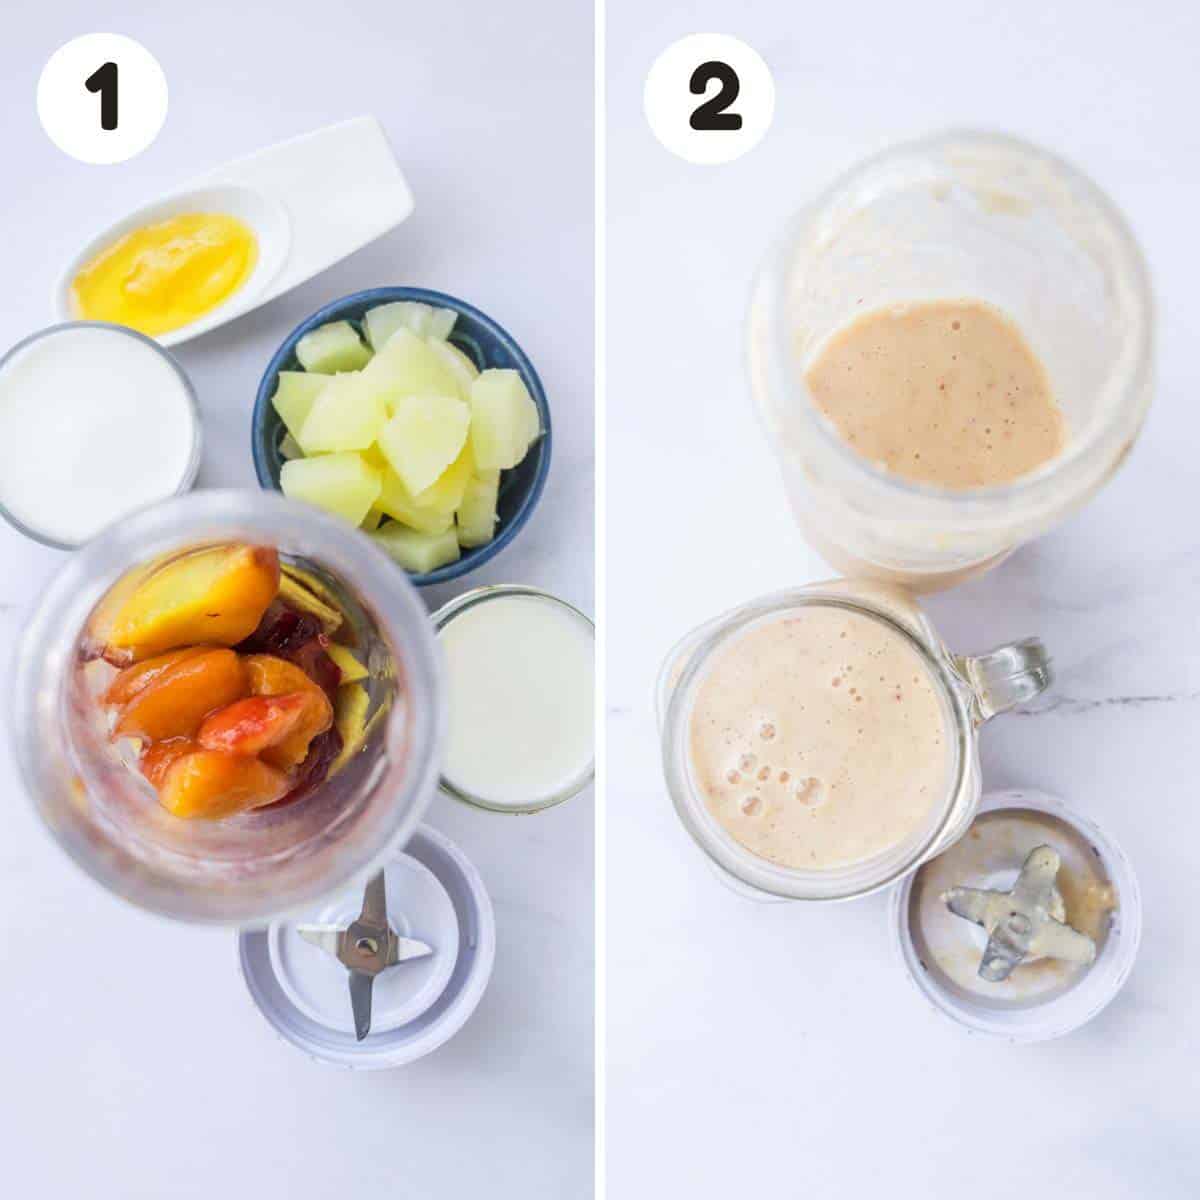 Steps to make the smoothie.